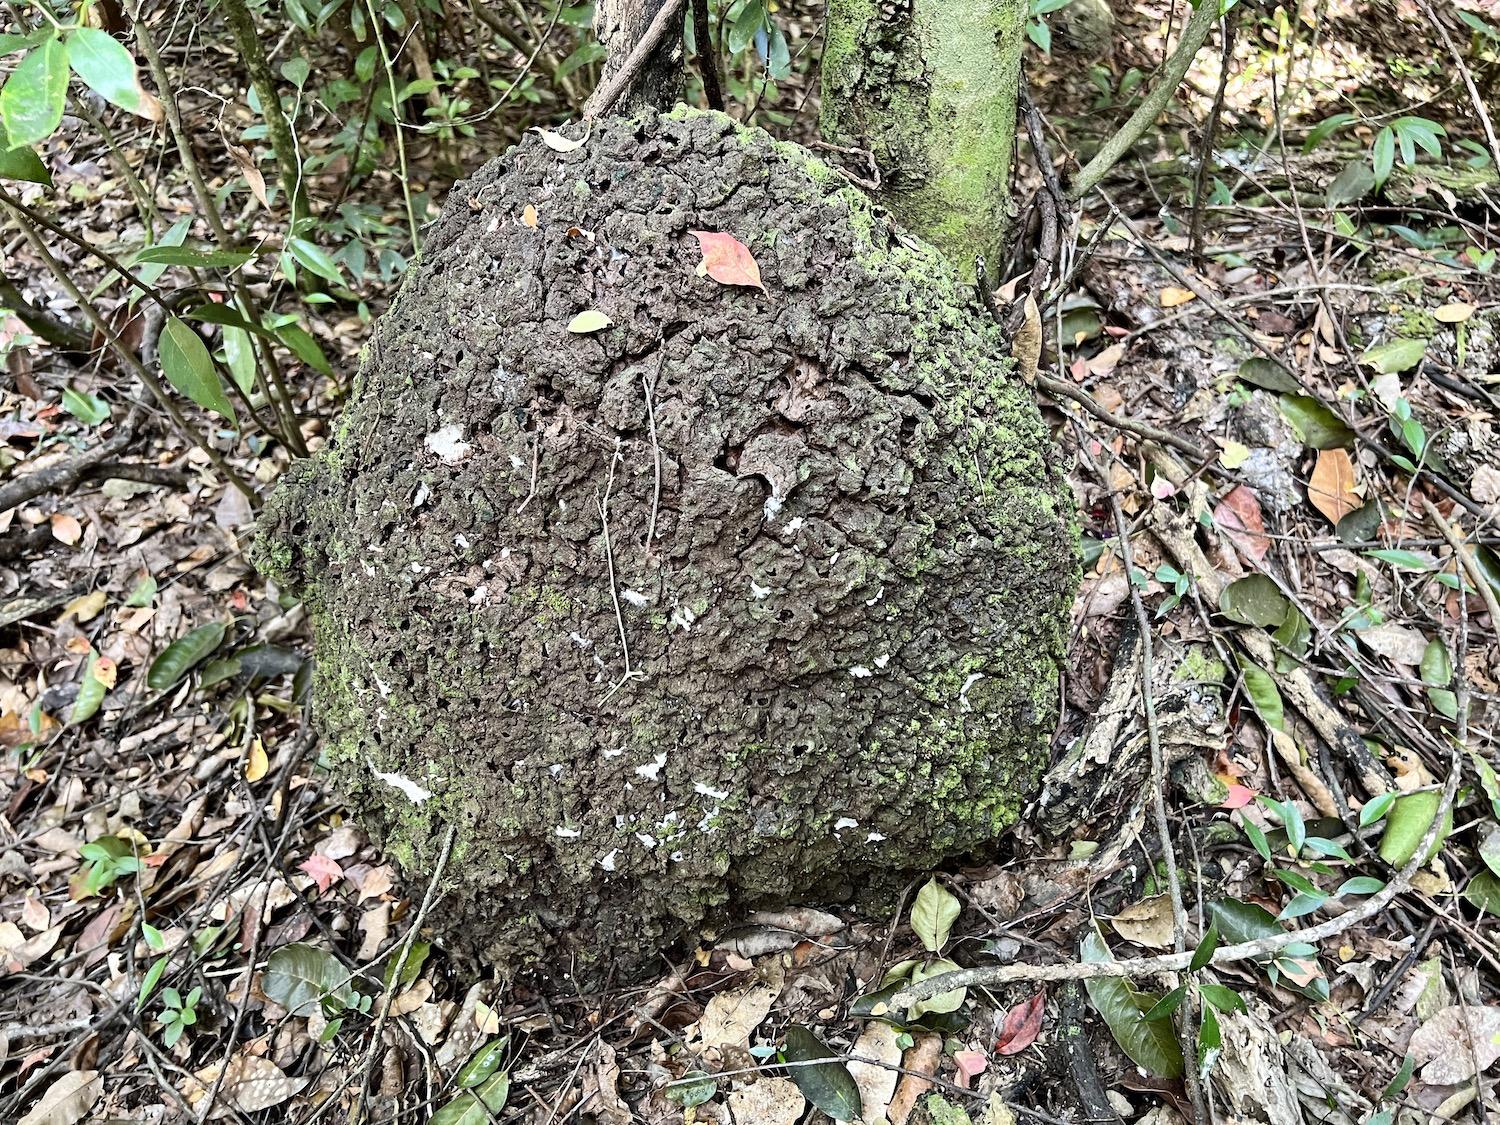 Termite mounds were once used by Bahamians to feed chicks.